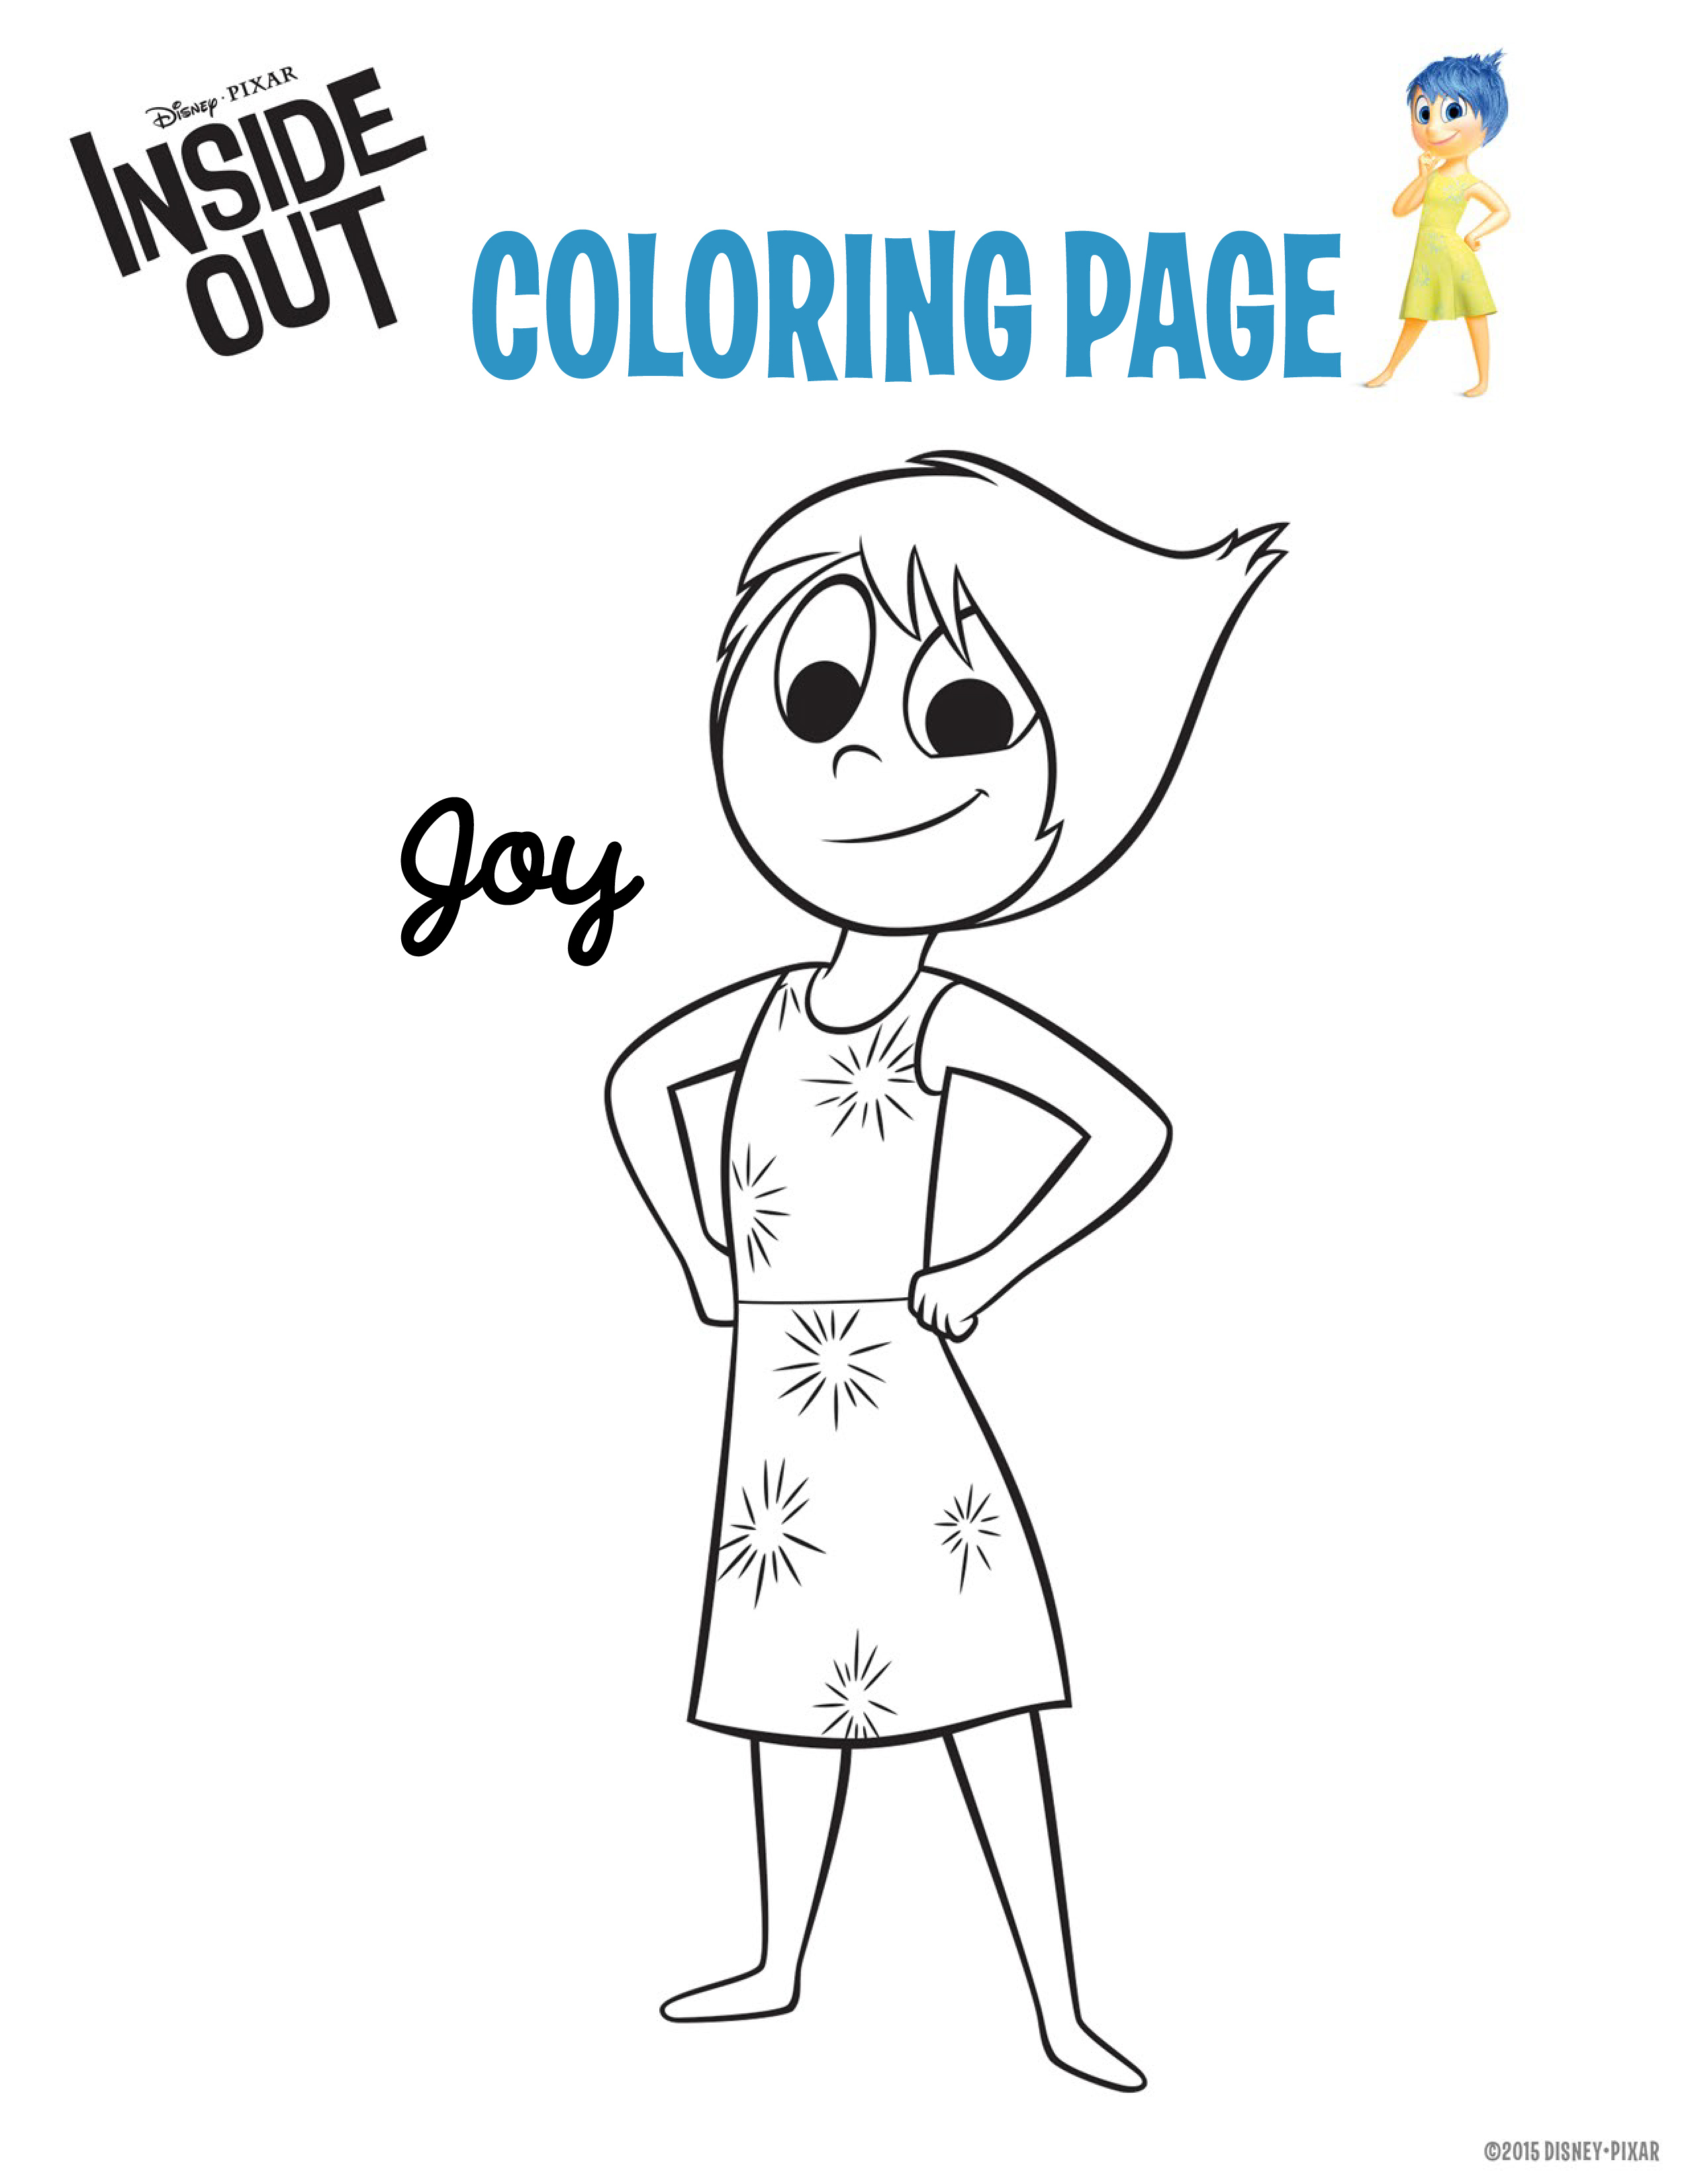 Simple Vice versa coloring for kids